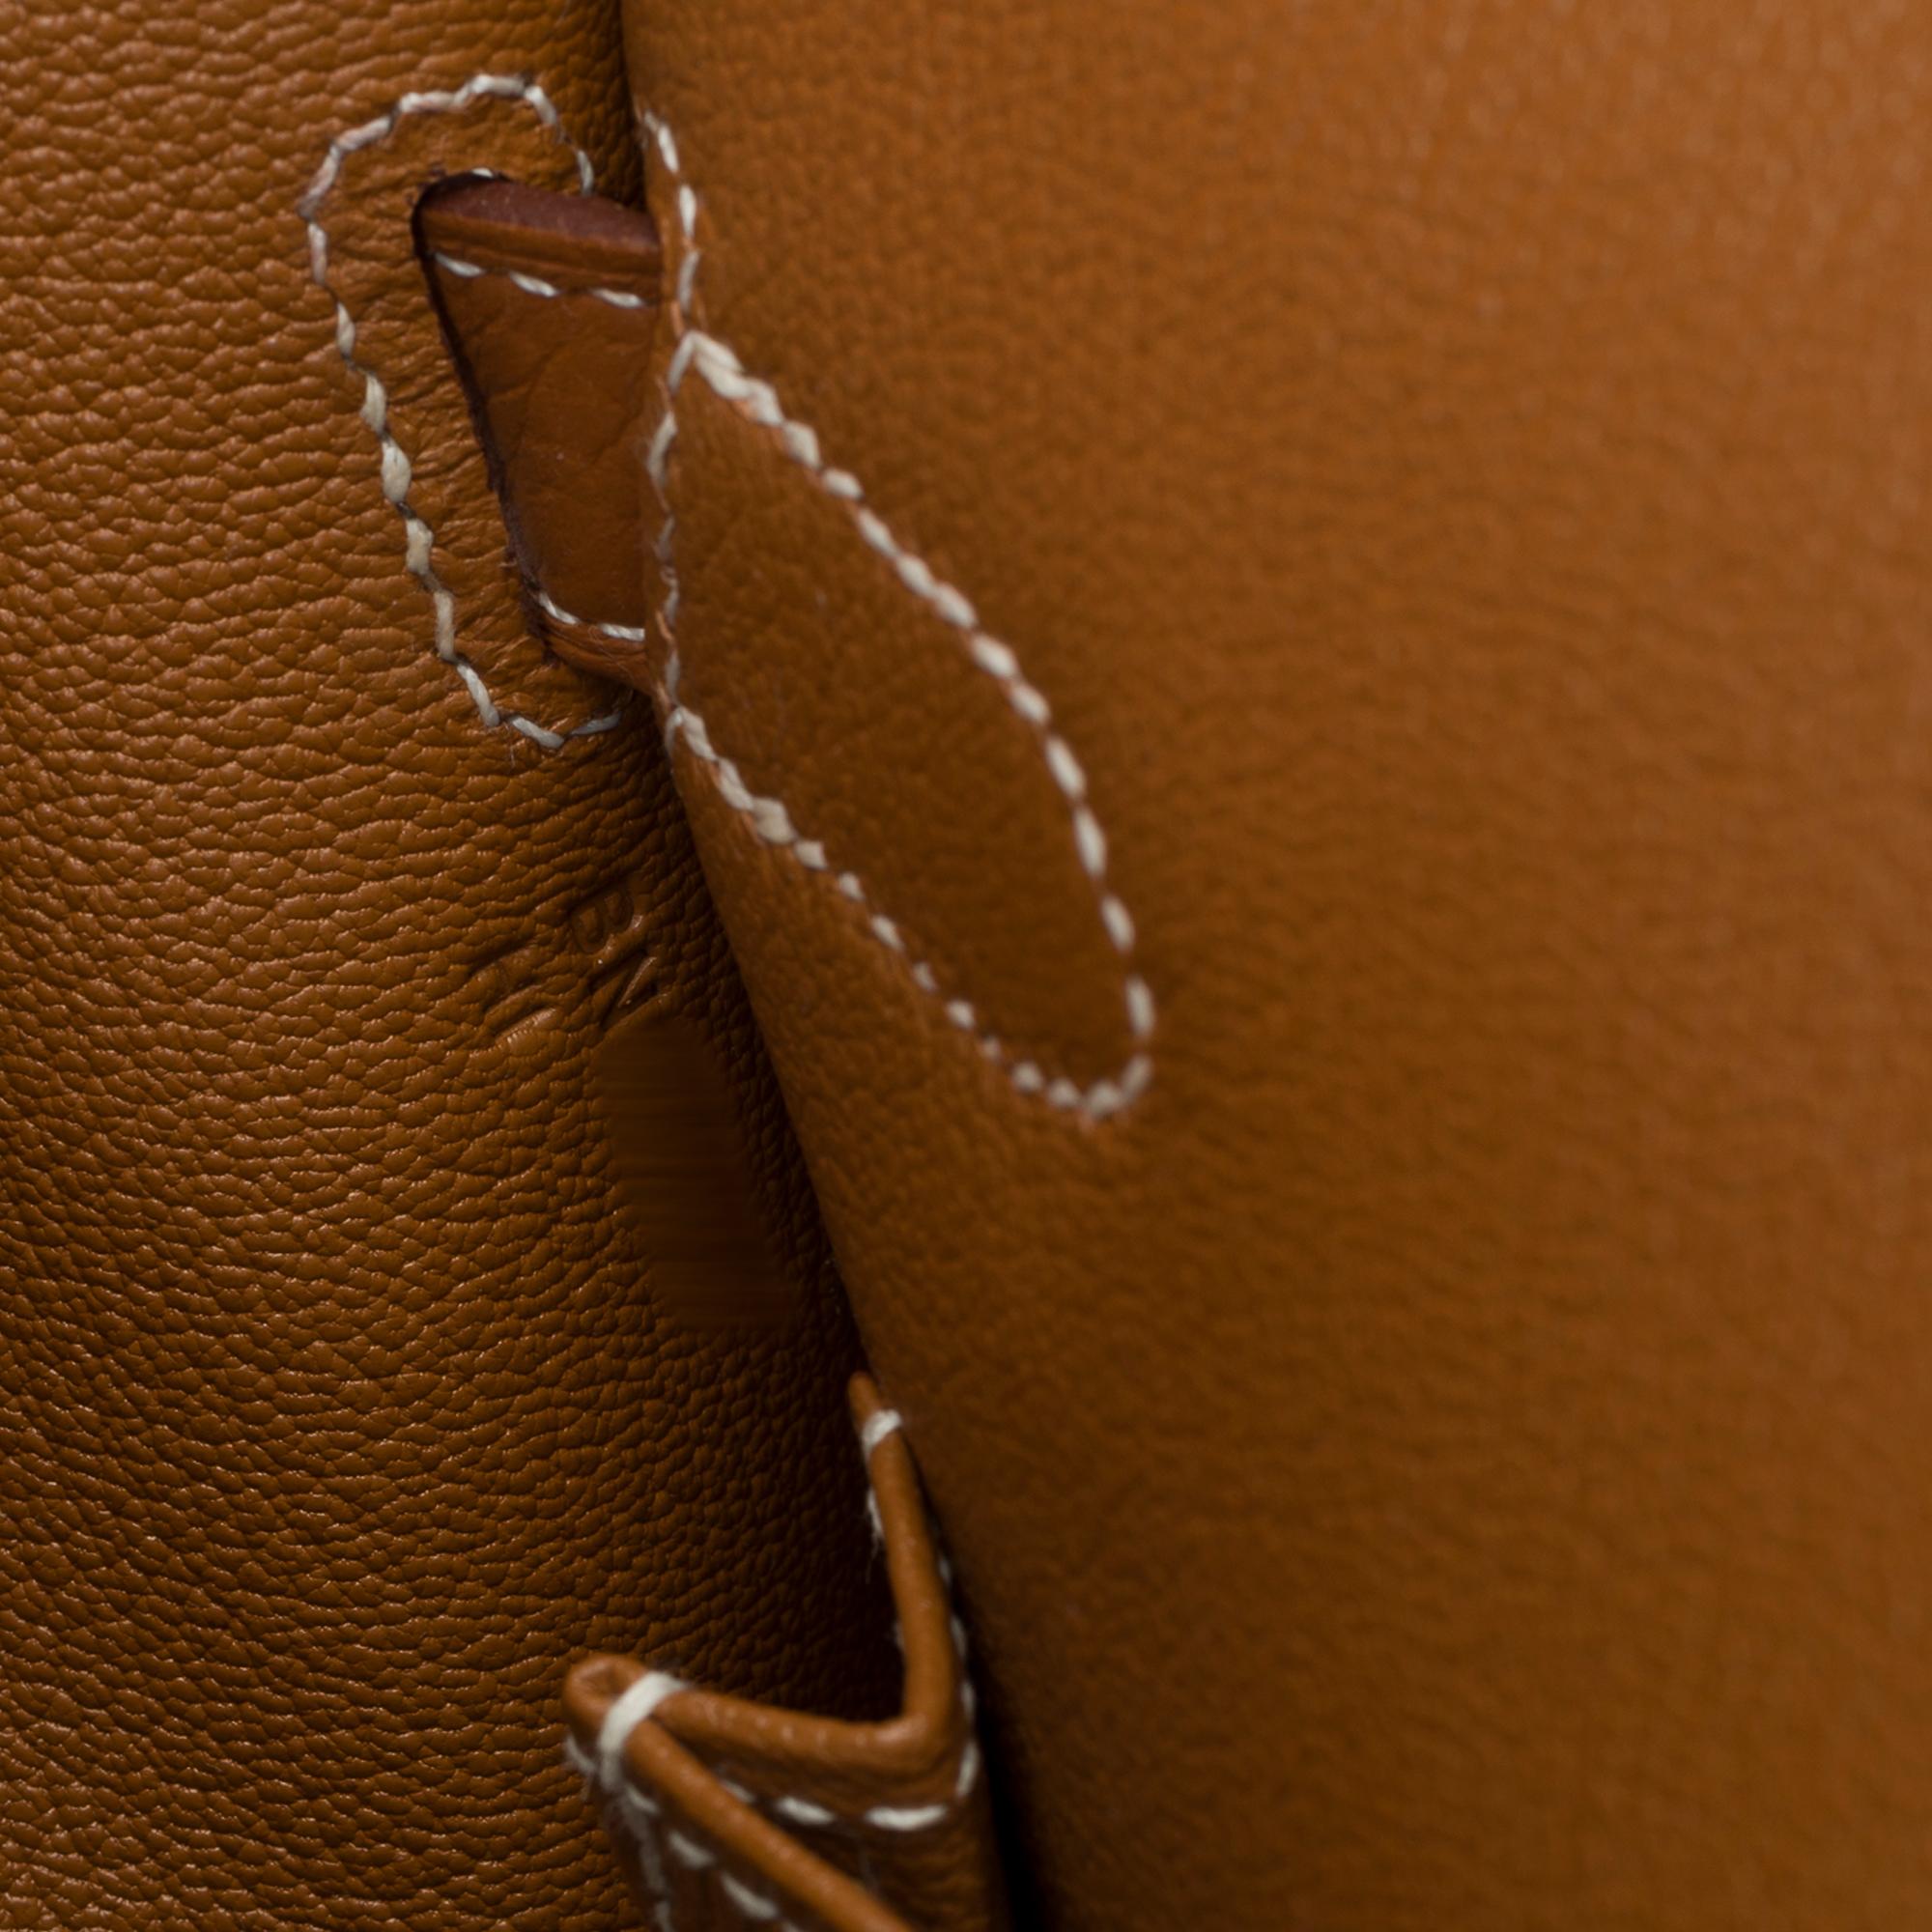 New Hermès Jypsière 28 crossbody bag in Gold Taurillon Clemence leather, PHW For Sale 5